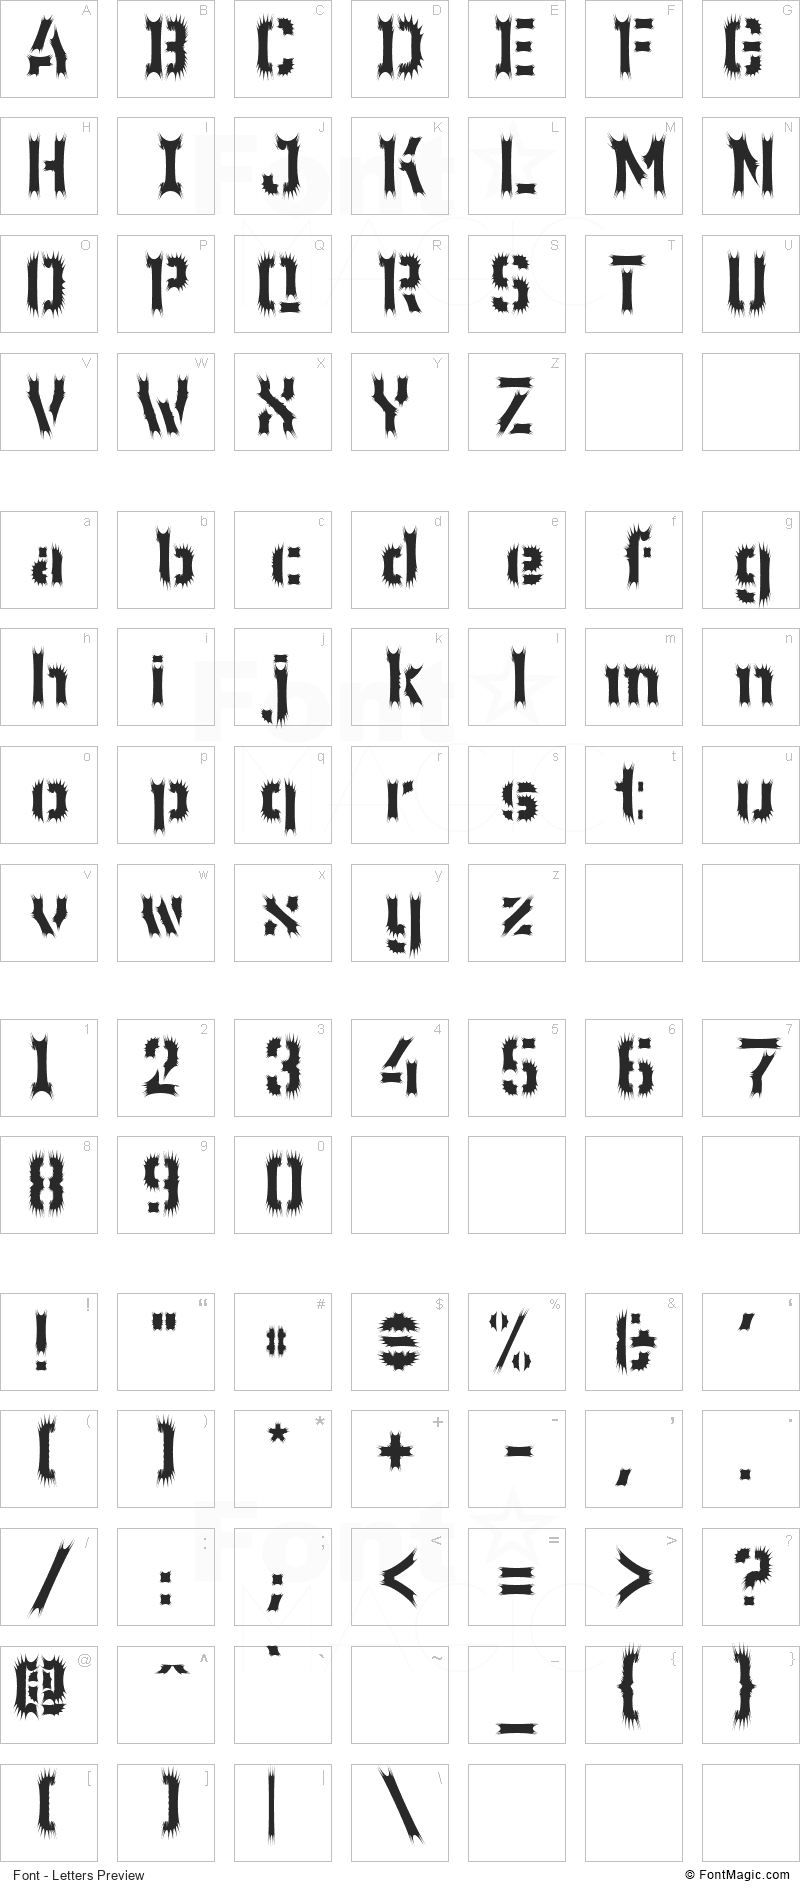 WC Wunderbach Wimpern Bta Font - All Latters Preview Chart